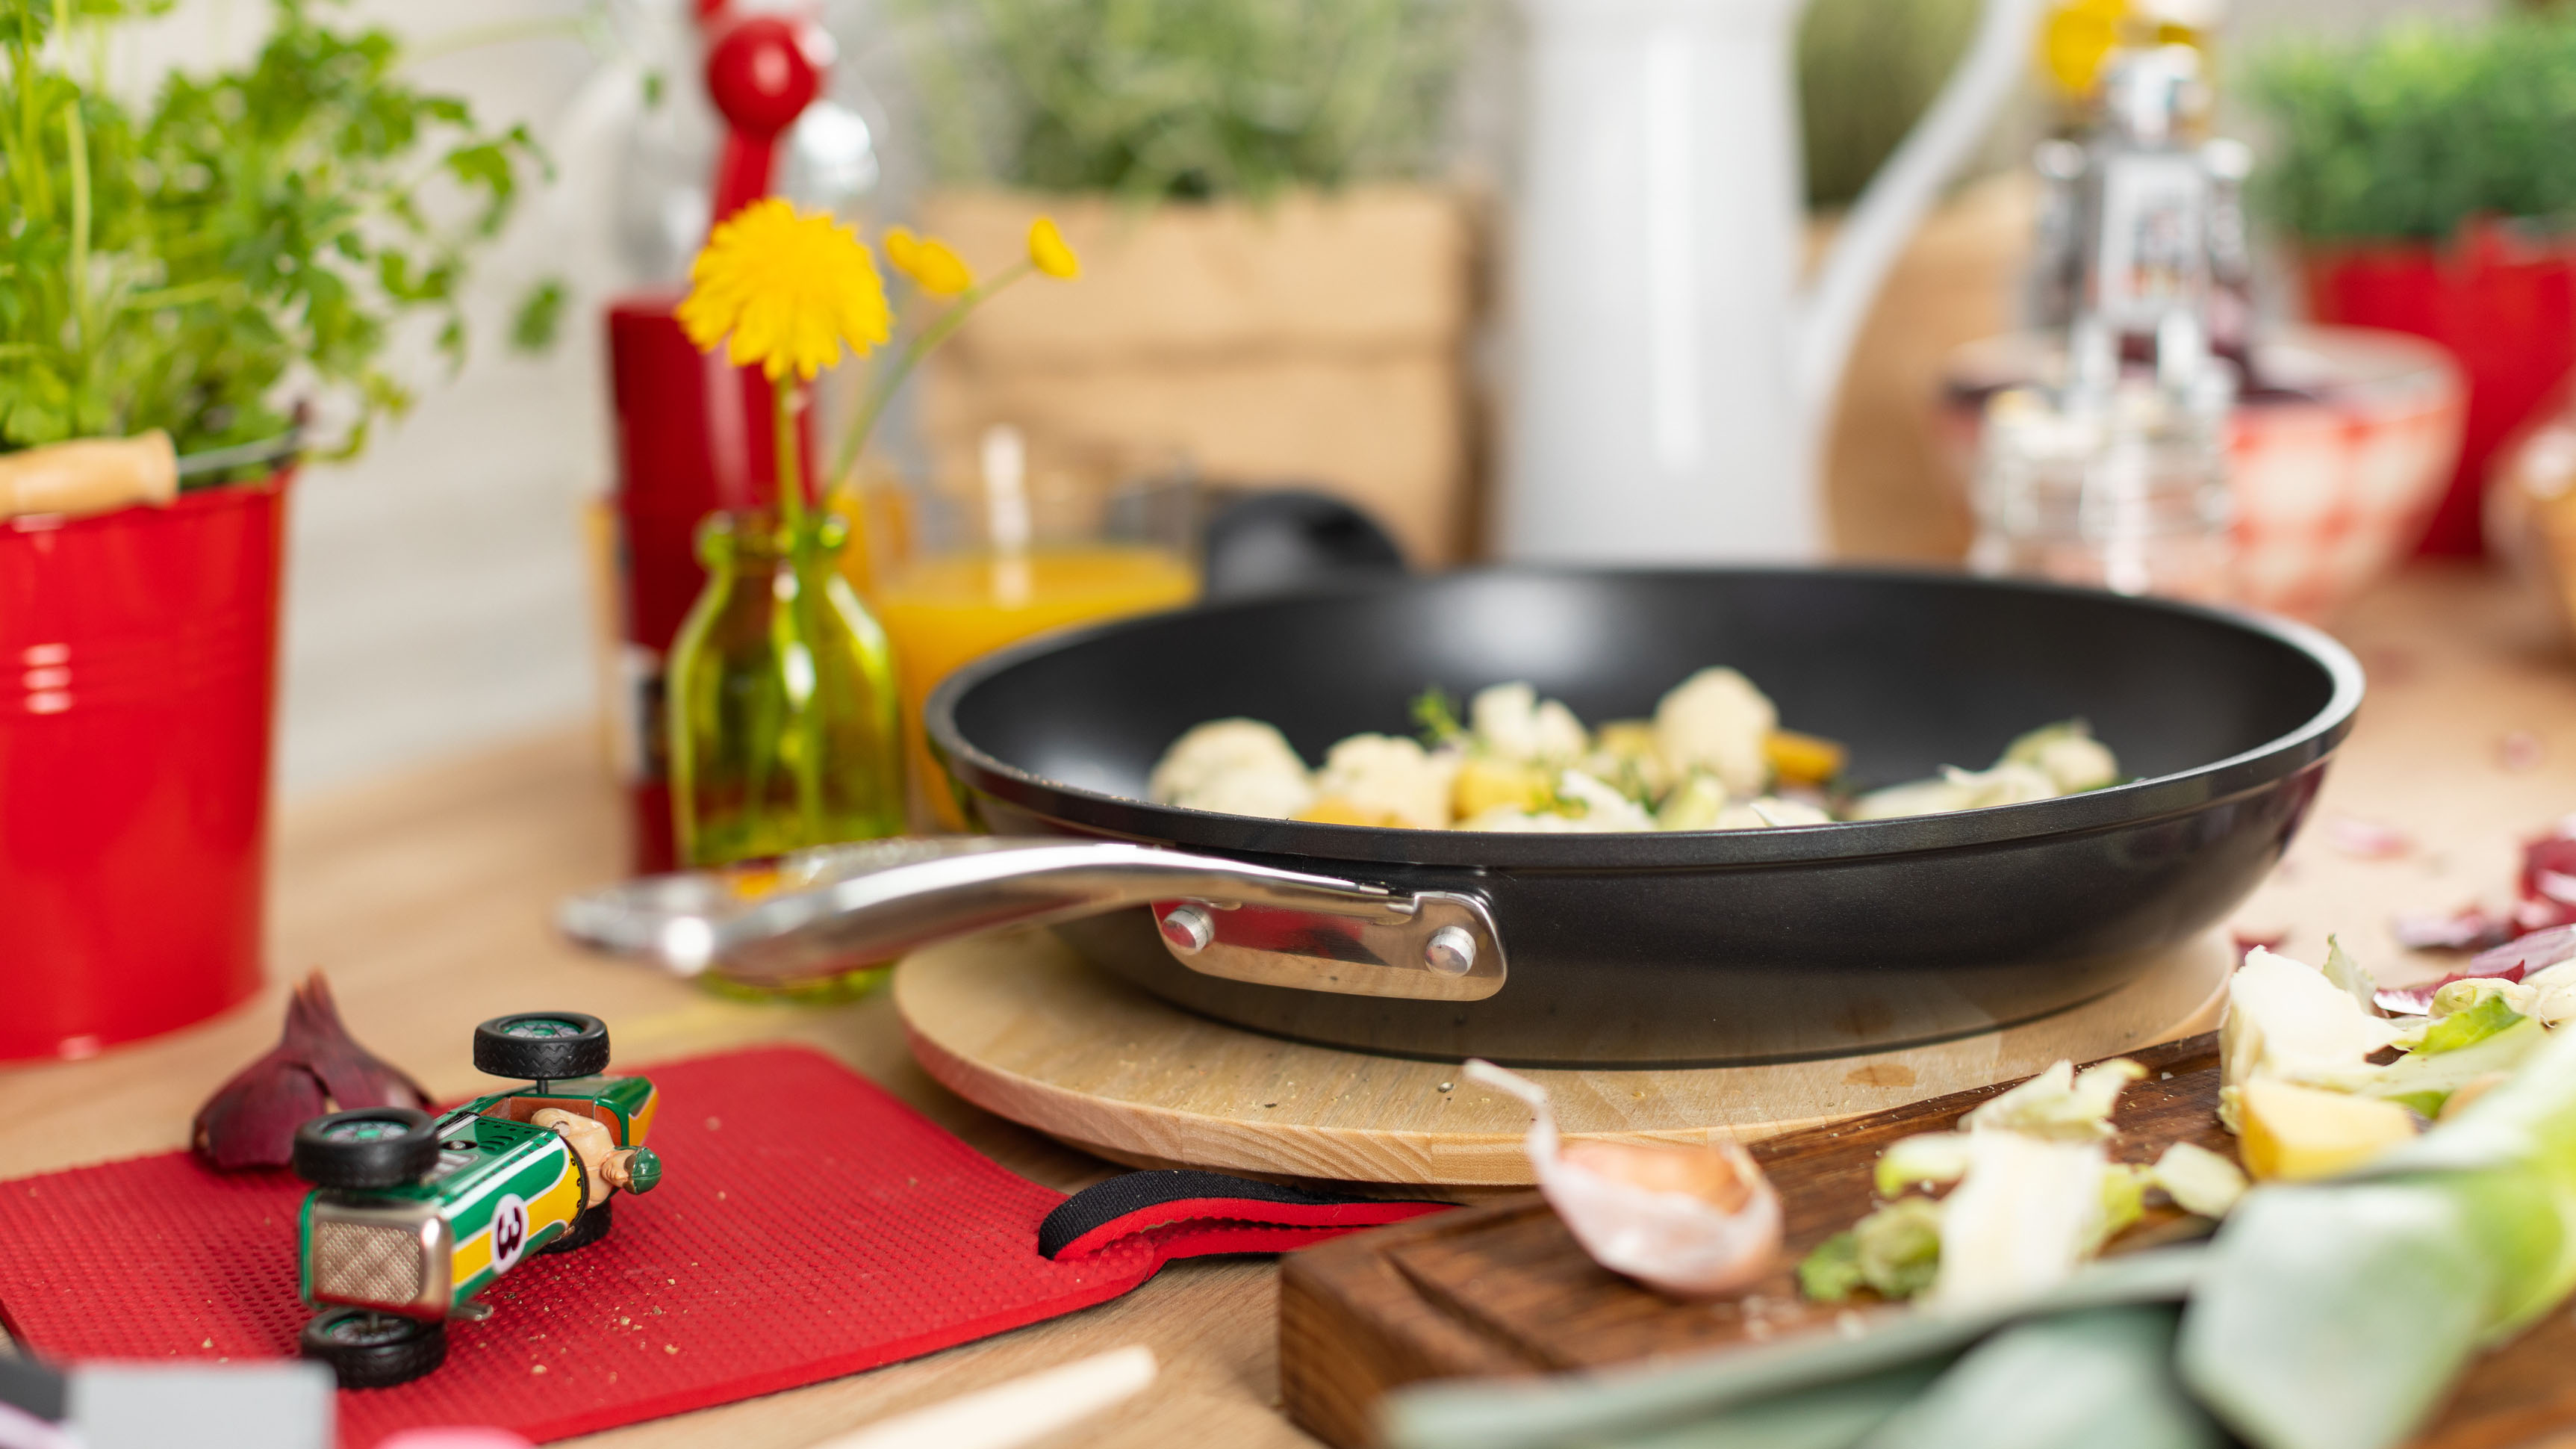 Tefal Unlimited ON frying pan review - Reviews